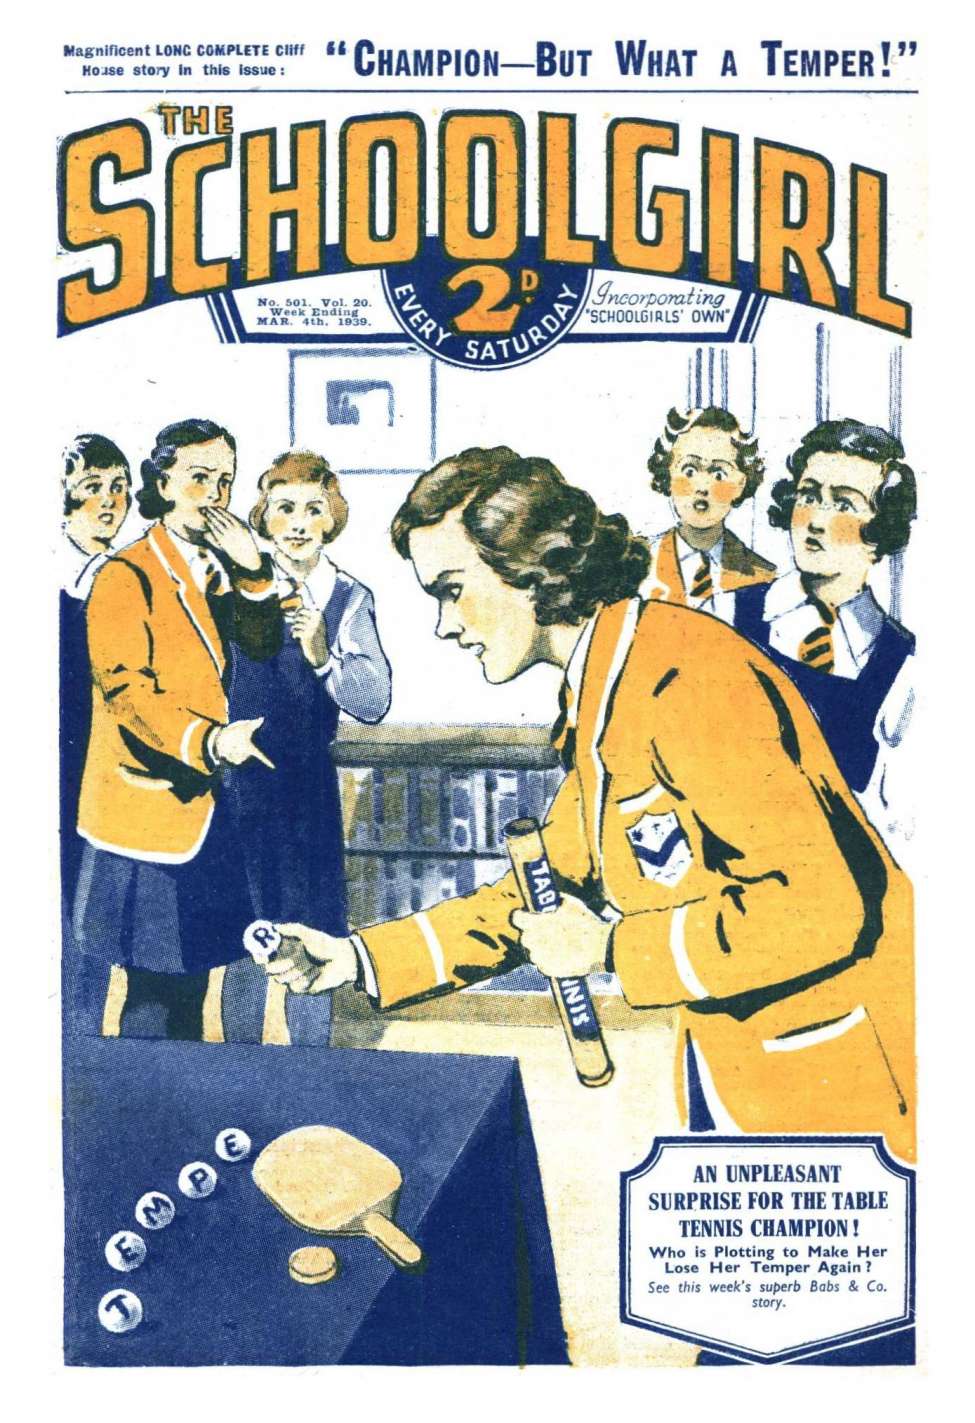 Book Cover For The Schoolgirl 501